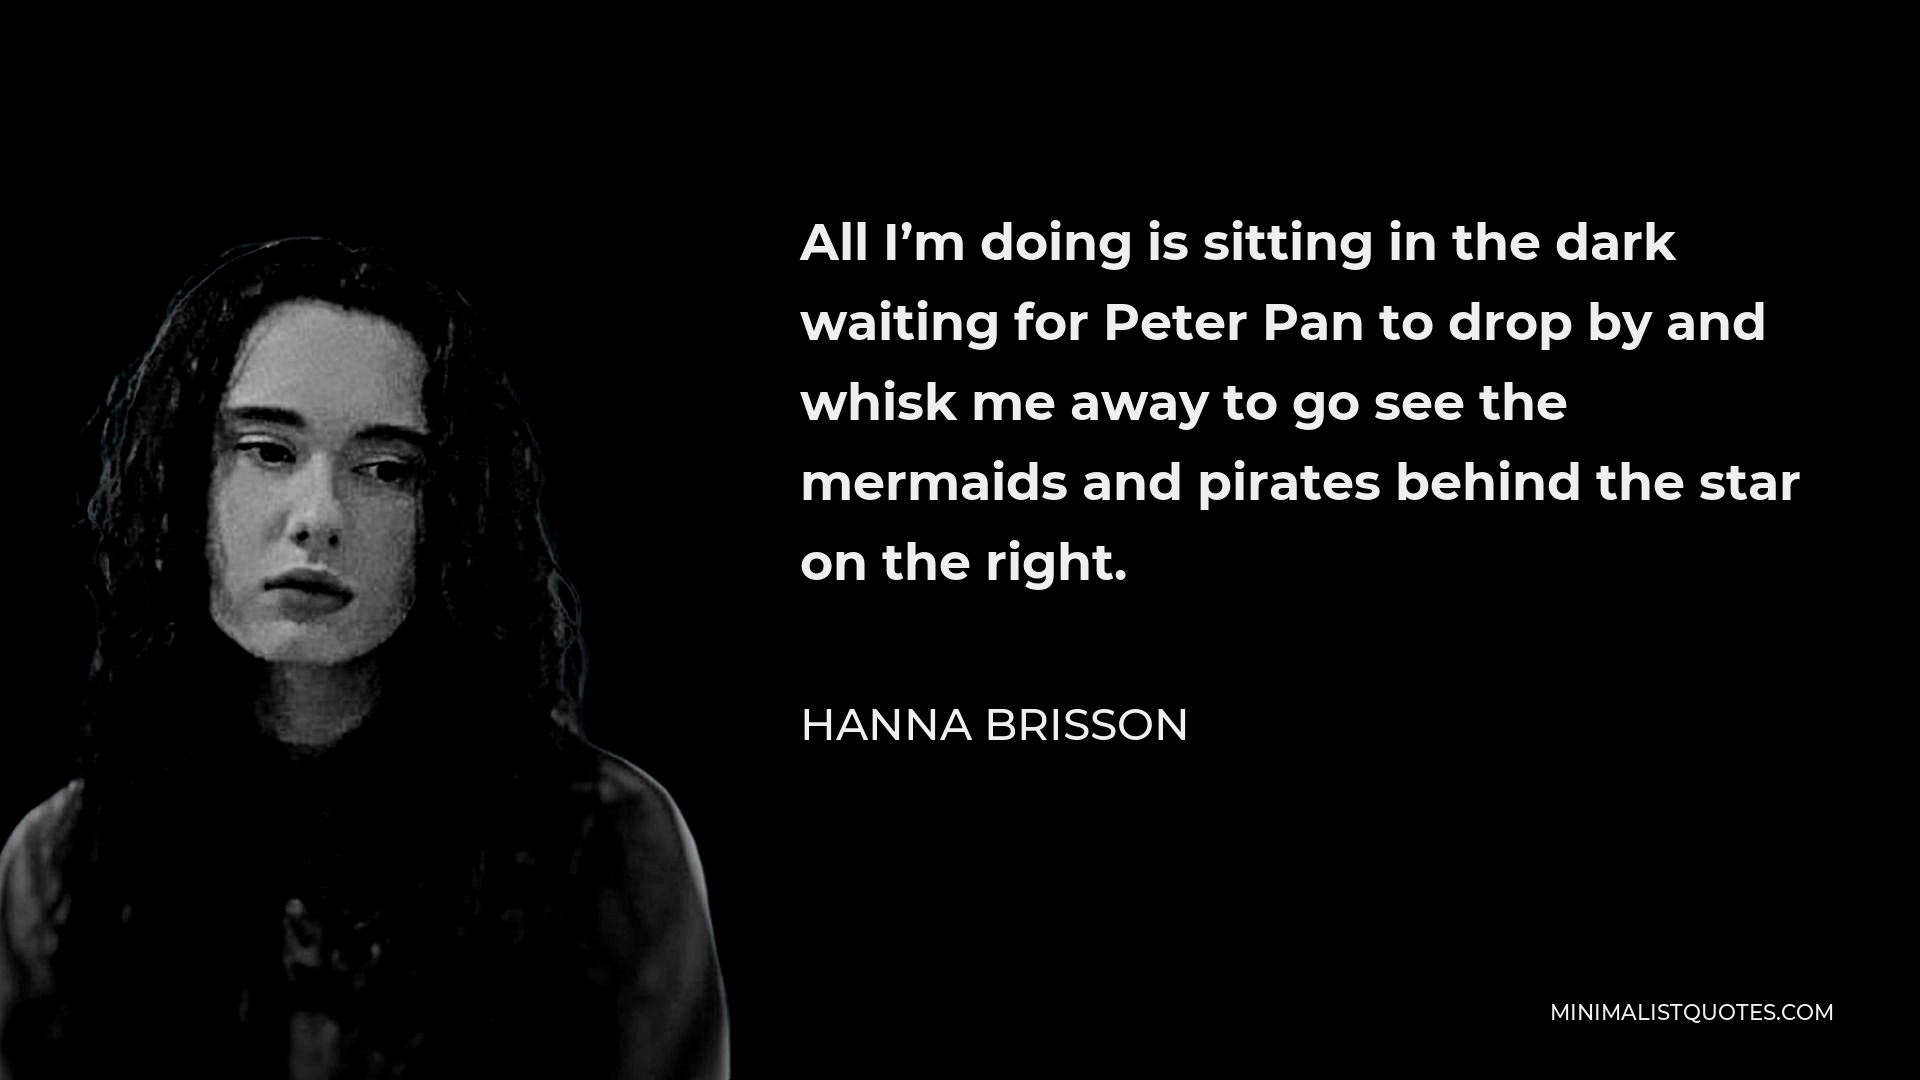 Hanna Brisson Quote - All I’m doing is sitting in the dark waiting for Peter Pan to drop by and whisk me away to go see the mermaids and pirates behind the star on the right.